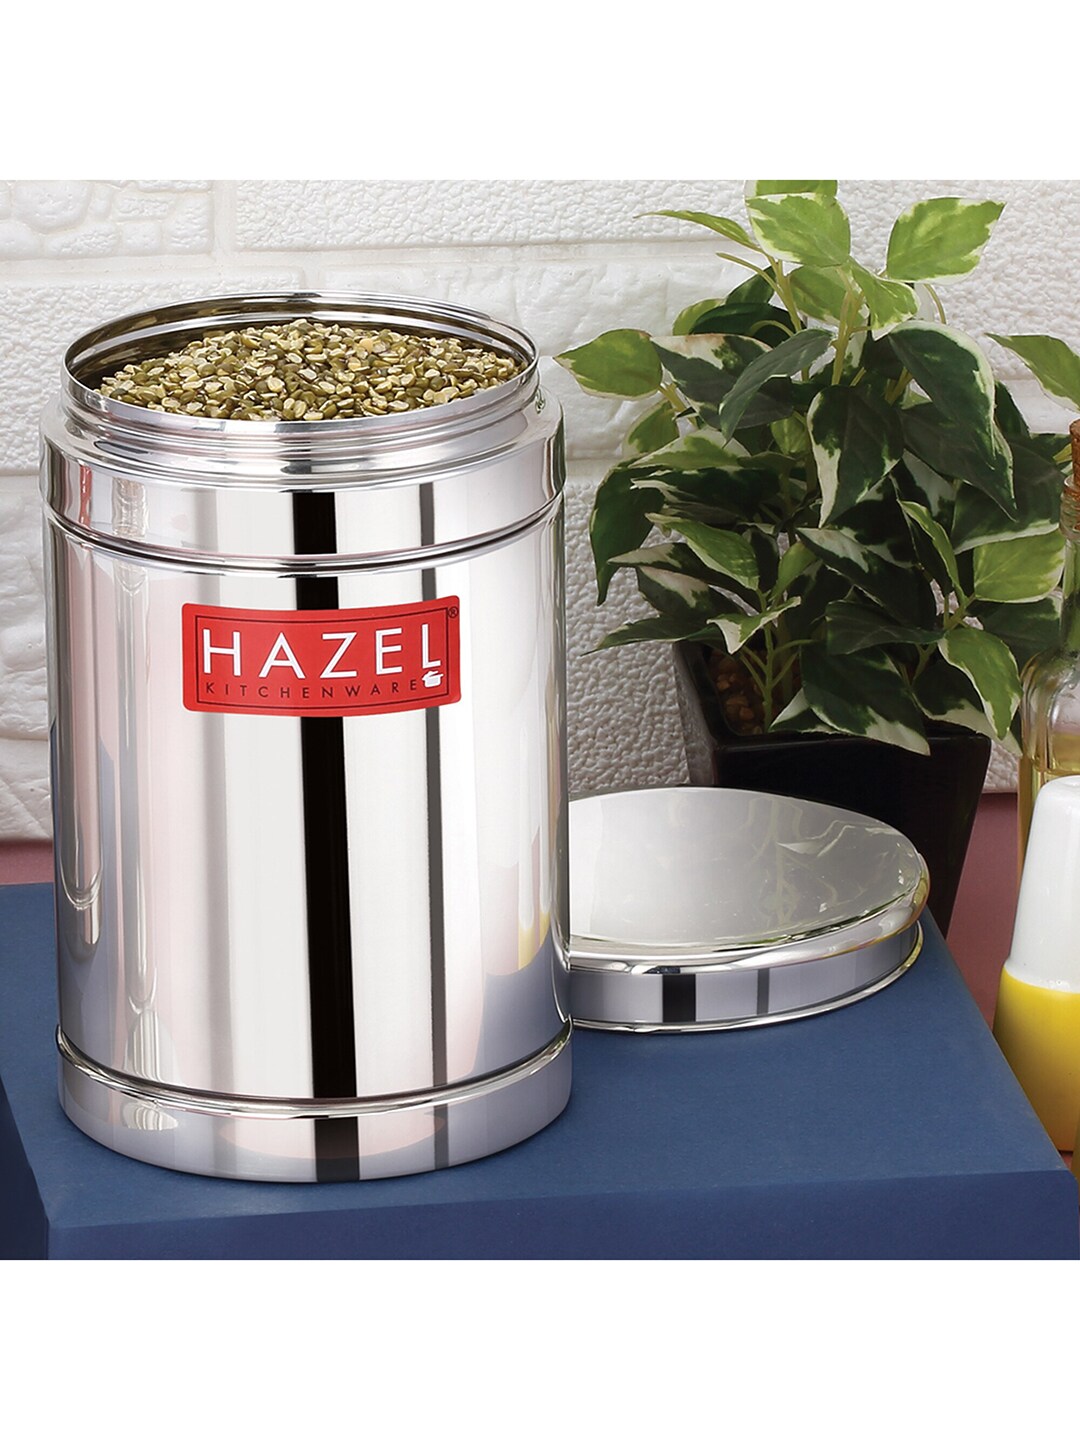 HAZEL Silver-Toned Stainless Steel Container 800 ml Price in India